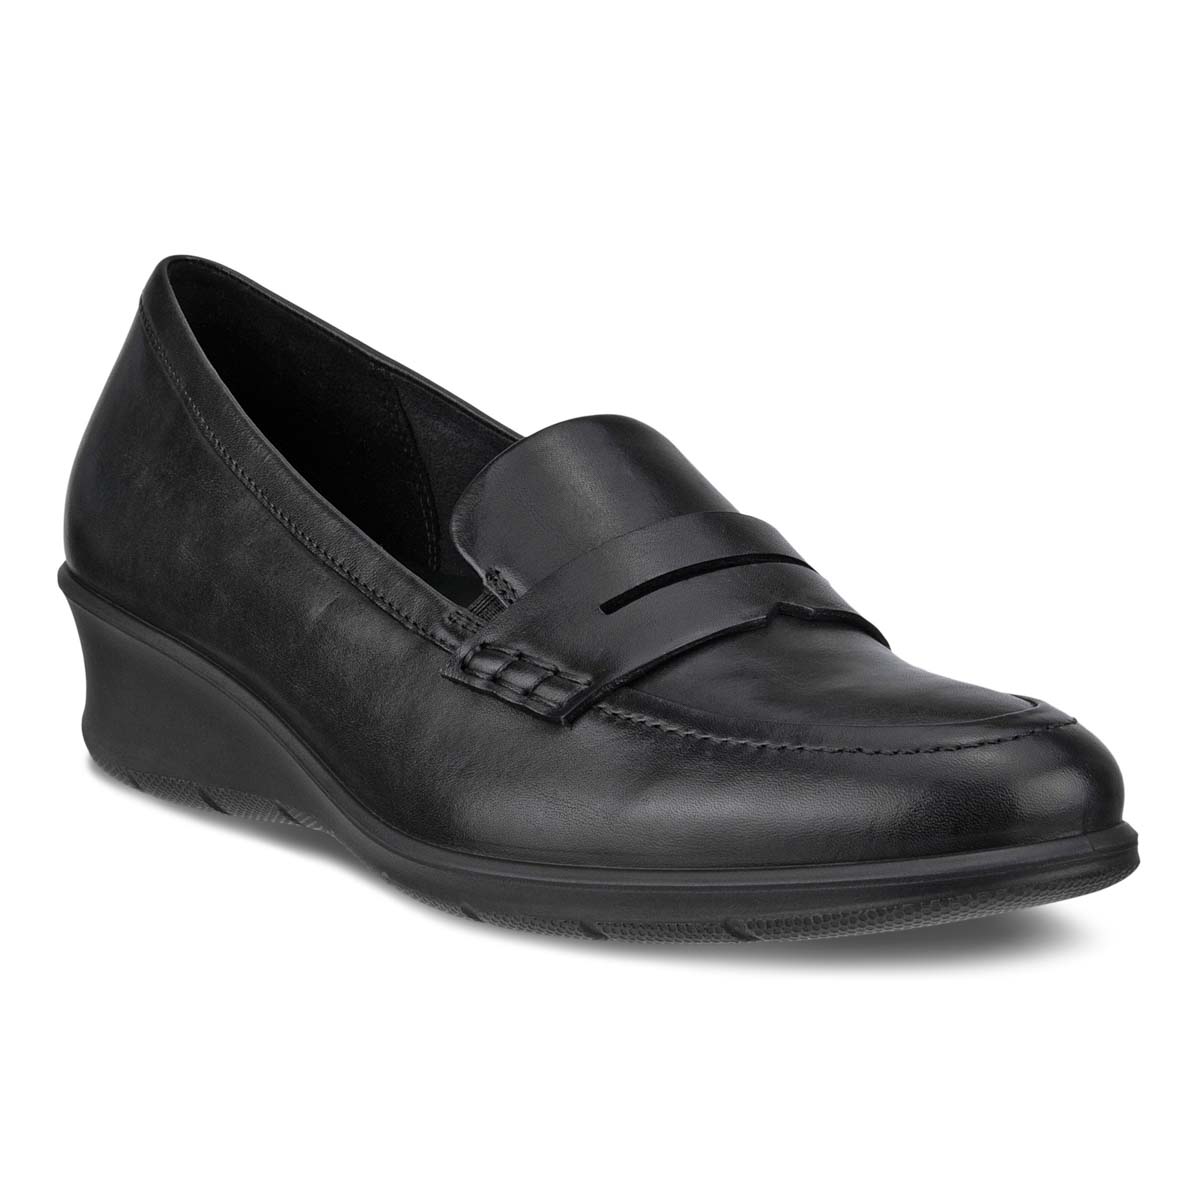 Ecco Felicia Loafer Black Leather Womens Comfort Slip On Shoes 217323-01001 In Size 39 In Plain Black Leather